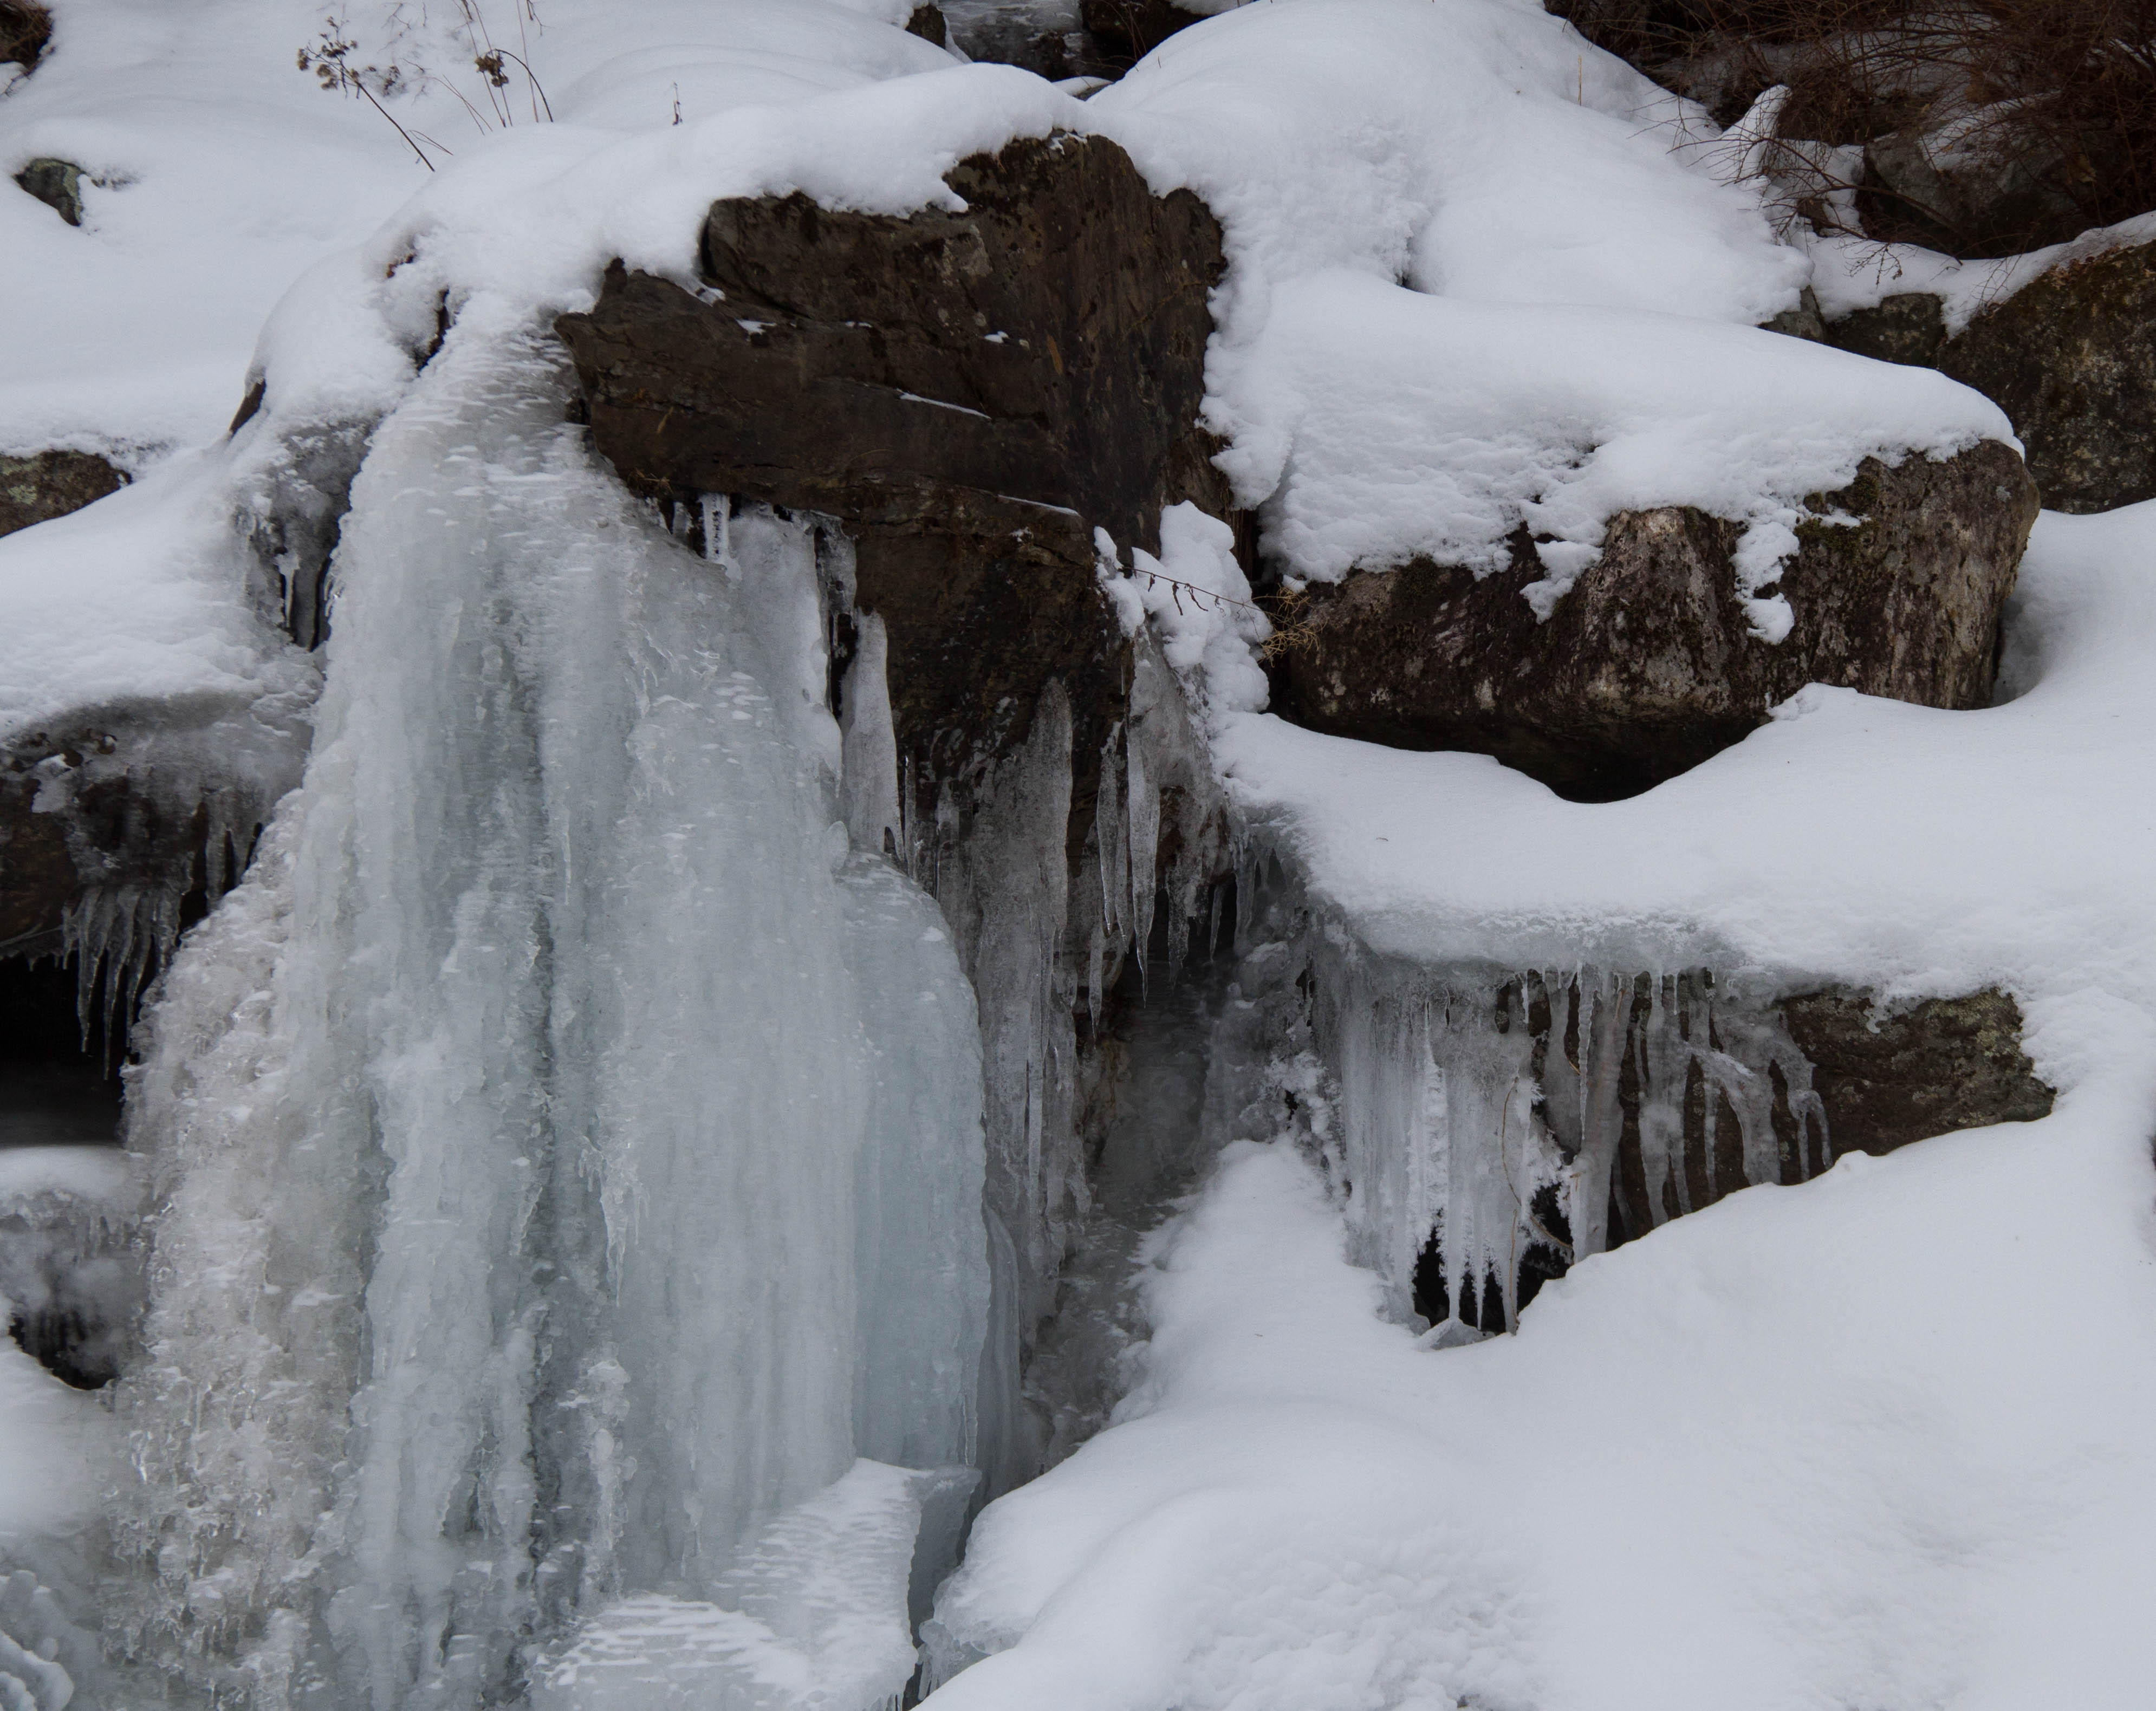 I took this close-up of frozen water in February as part of a group of photos showing the Cascade from different angles.